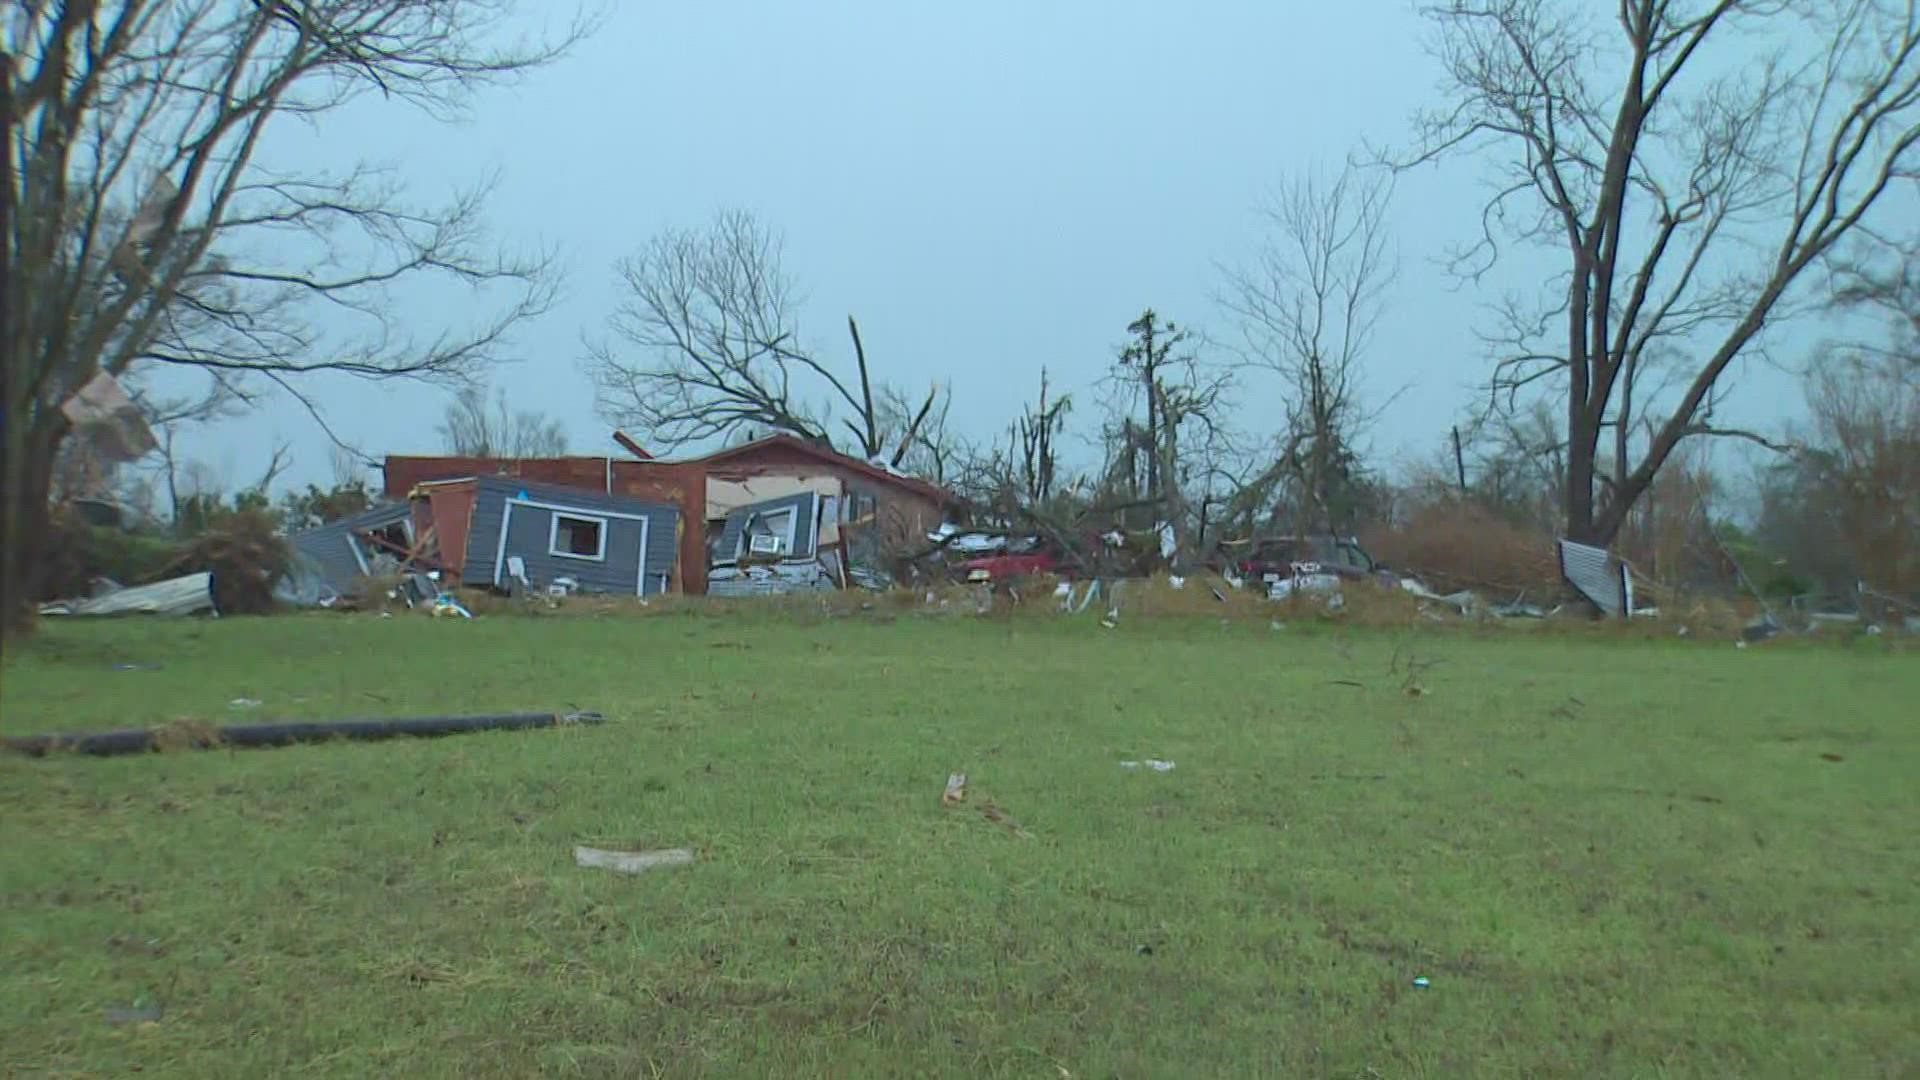 Crockett, in Houston County, was one of the hardest hit communities as powerful thunderstorms barreled  through Texas overnight. A tornado caused extensive damage.